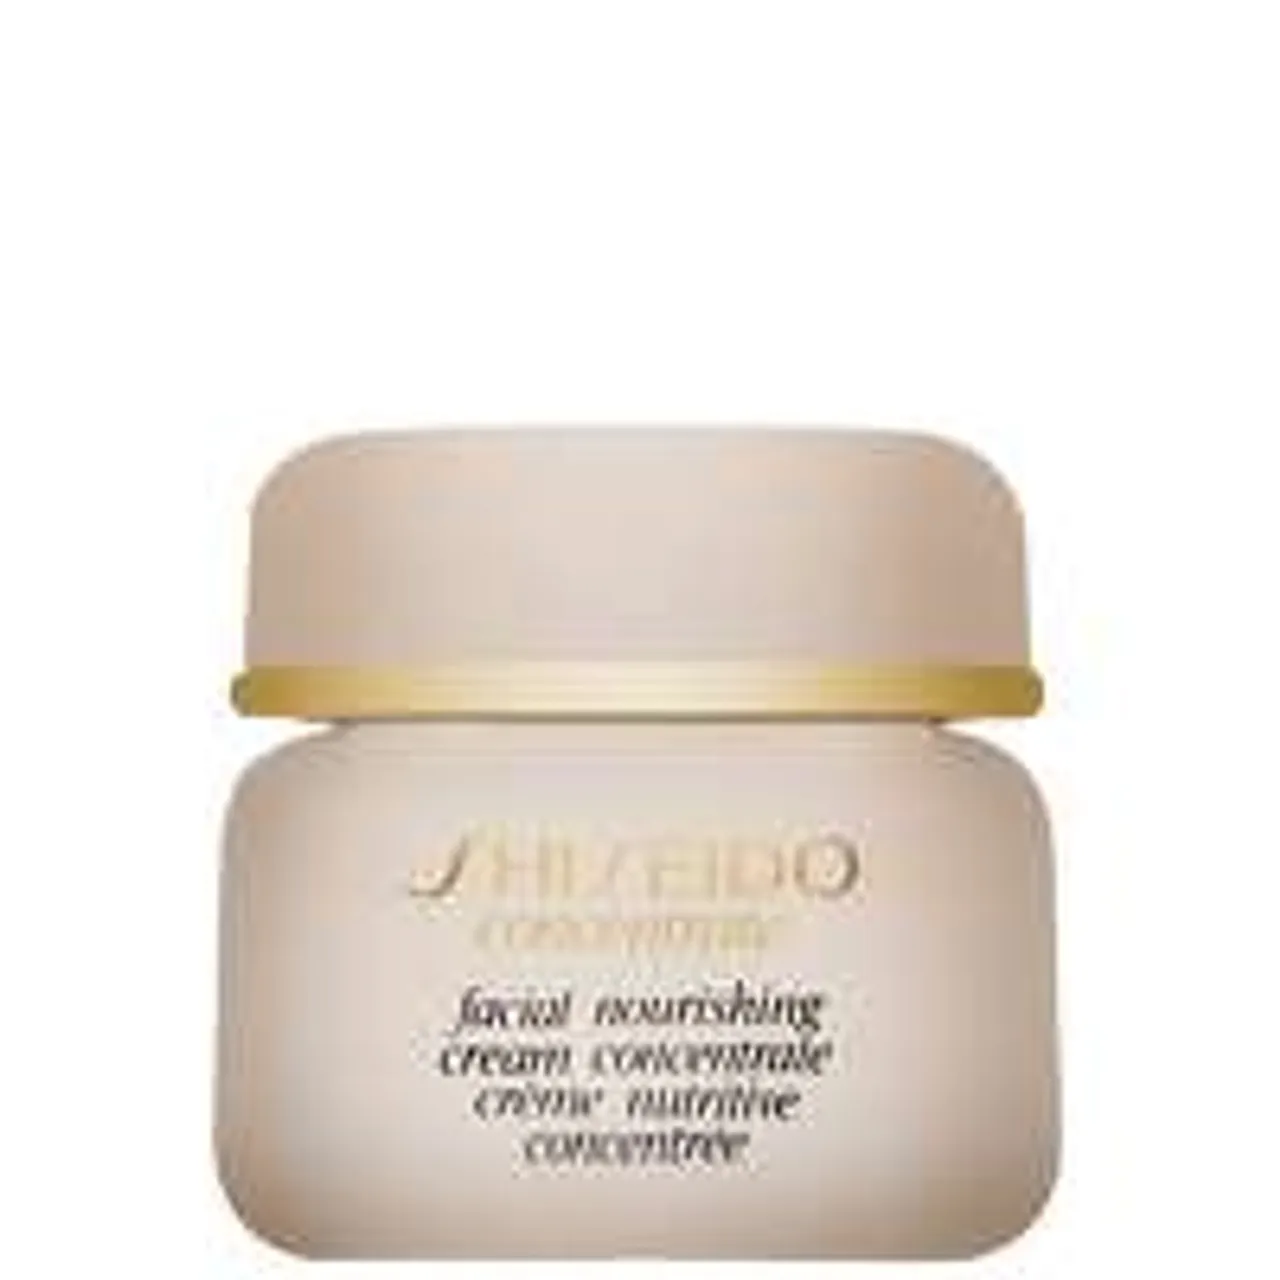 Shiseido Day And Night Creams Concentrate: Facial Nourishing Cream Concentrate 30ml / 1 oz.